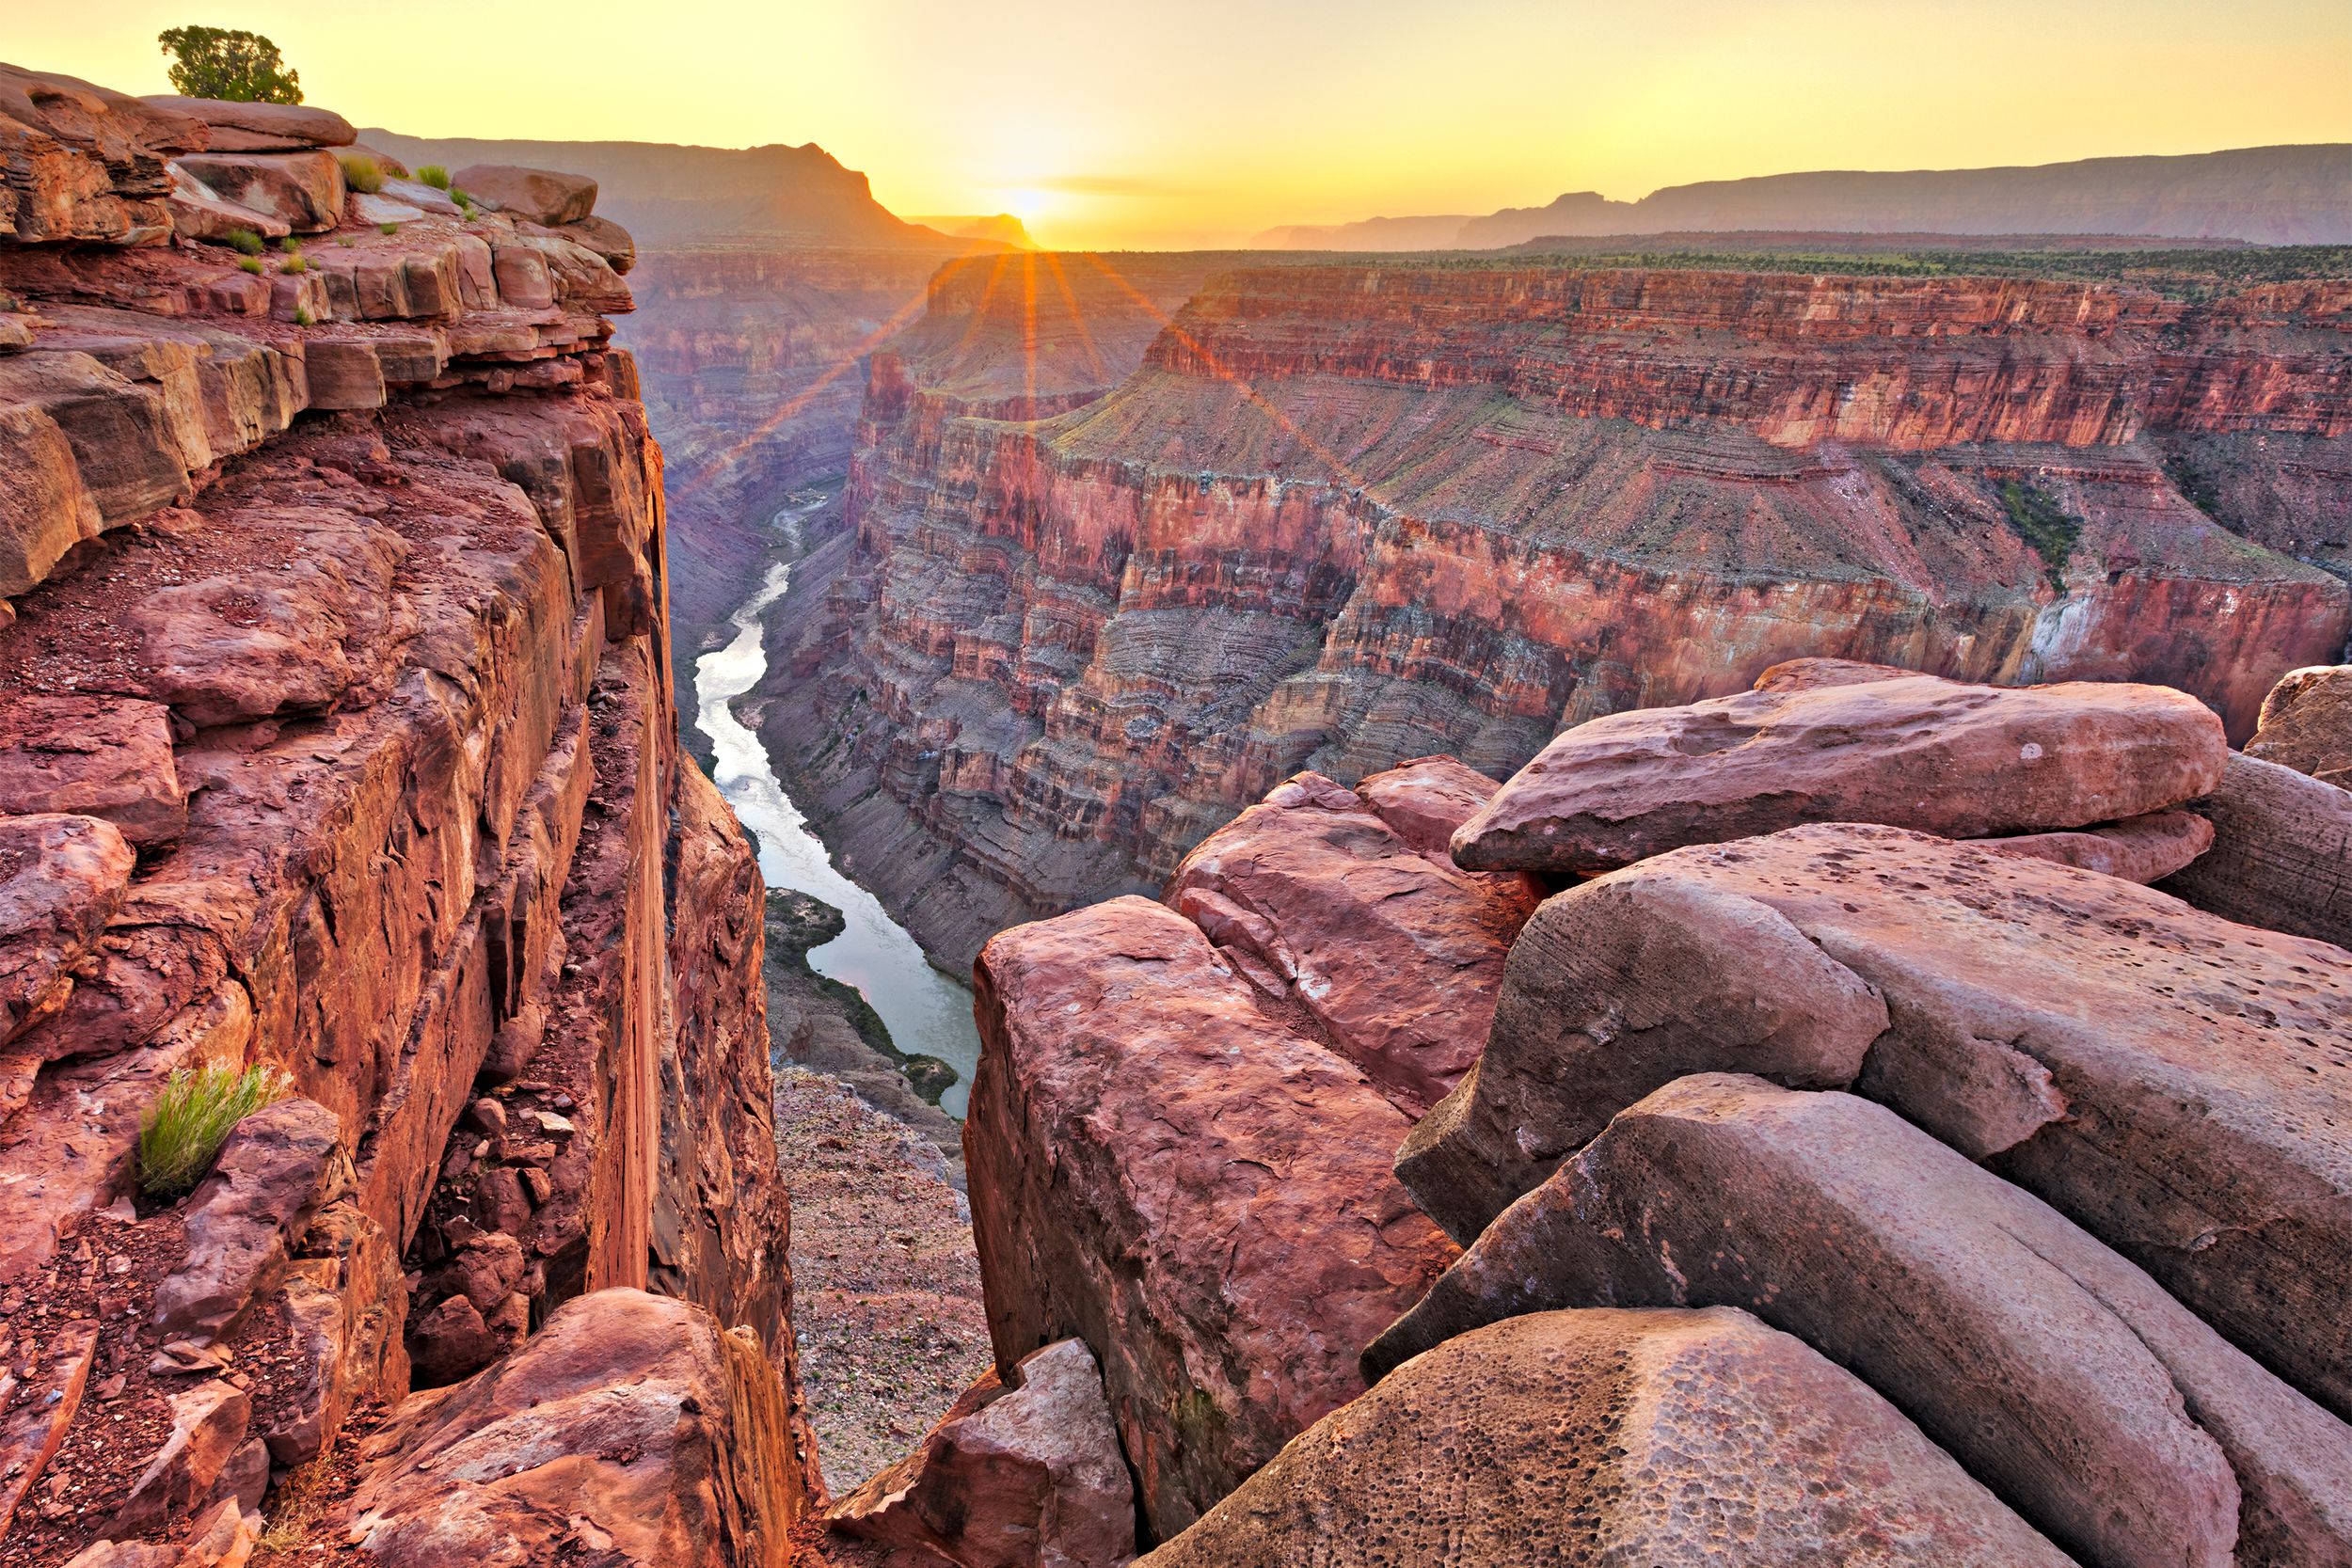 <a href="https://www.nps.gov/grca/index.htm">Grand Canyon National Park</a> is one of the most famous national parks in the country. By some accounts, the Colorado River began carving the Grand Canyon about 6 million years ago. Though other studies suggest this stunning canyon, which is 6,093 feet deep in some places, may date back as far as 70 million years.